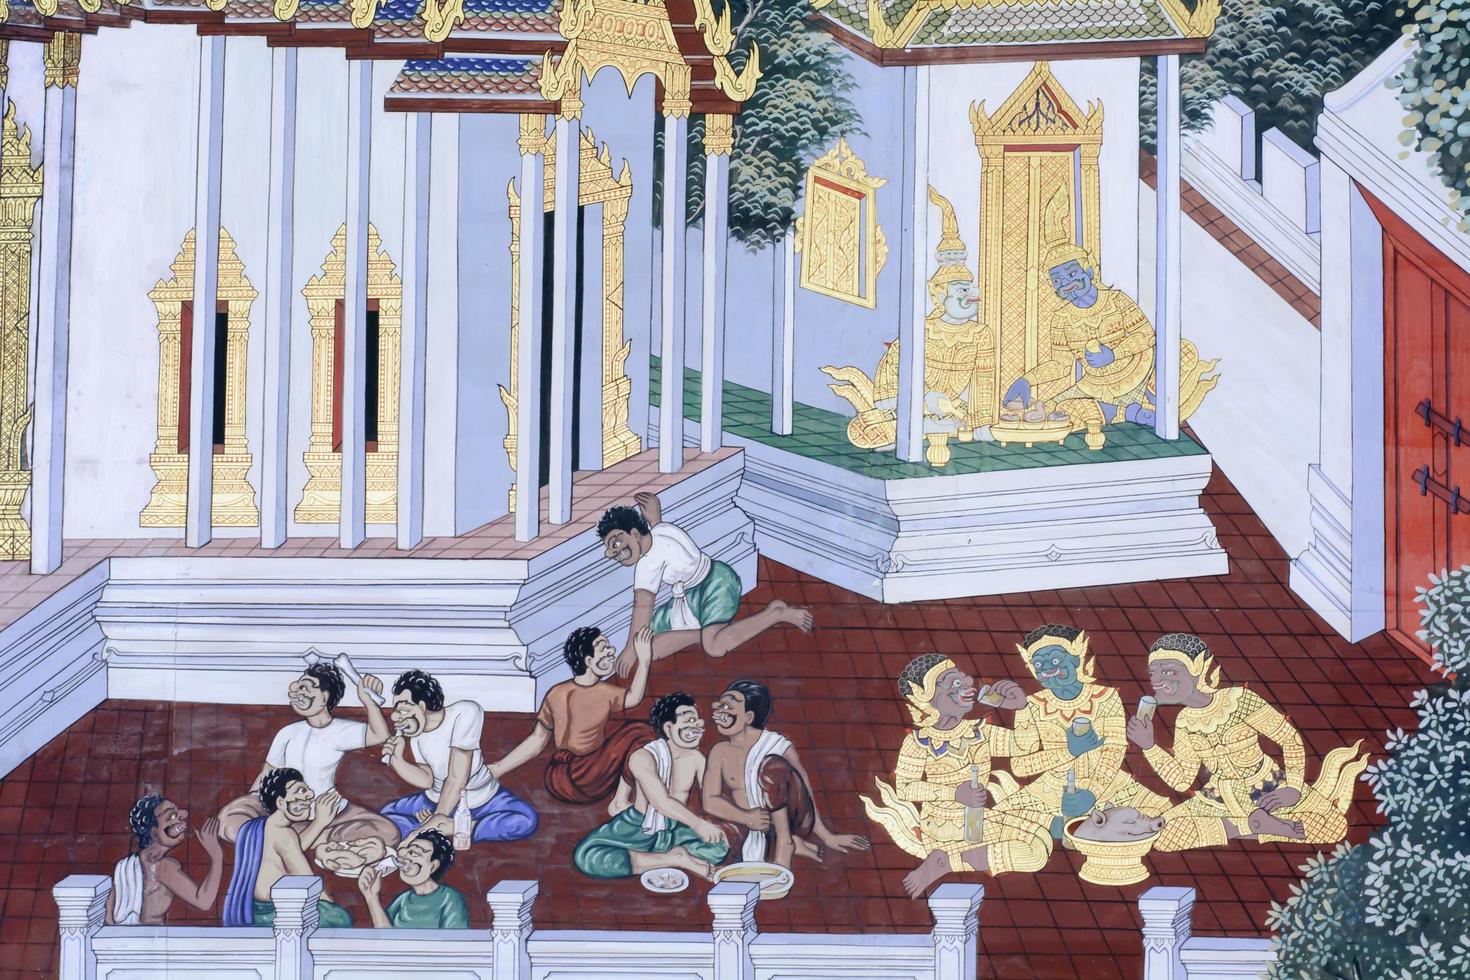 Bangkok, Thailand - JUL 24, 2015 - Mural painting in wat phra kaew, Bangkok Thailand. A place everyone in every religion can be viewed. photo